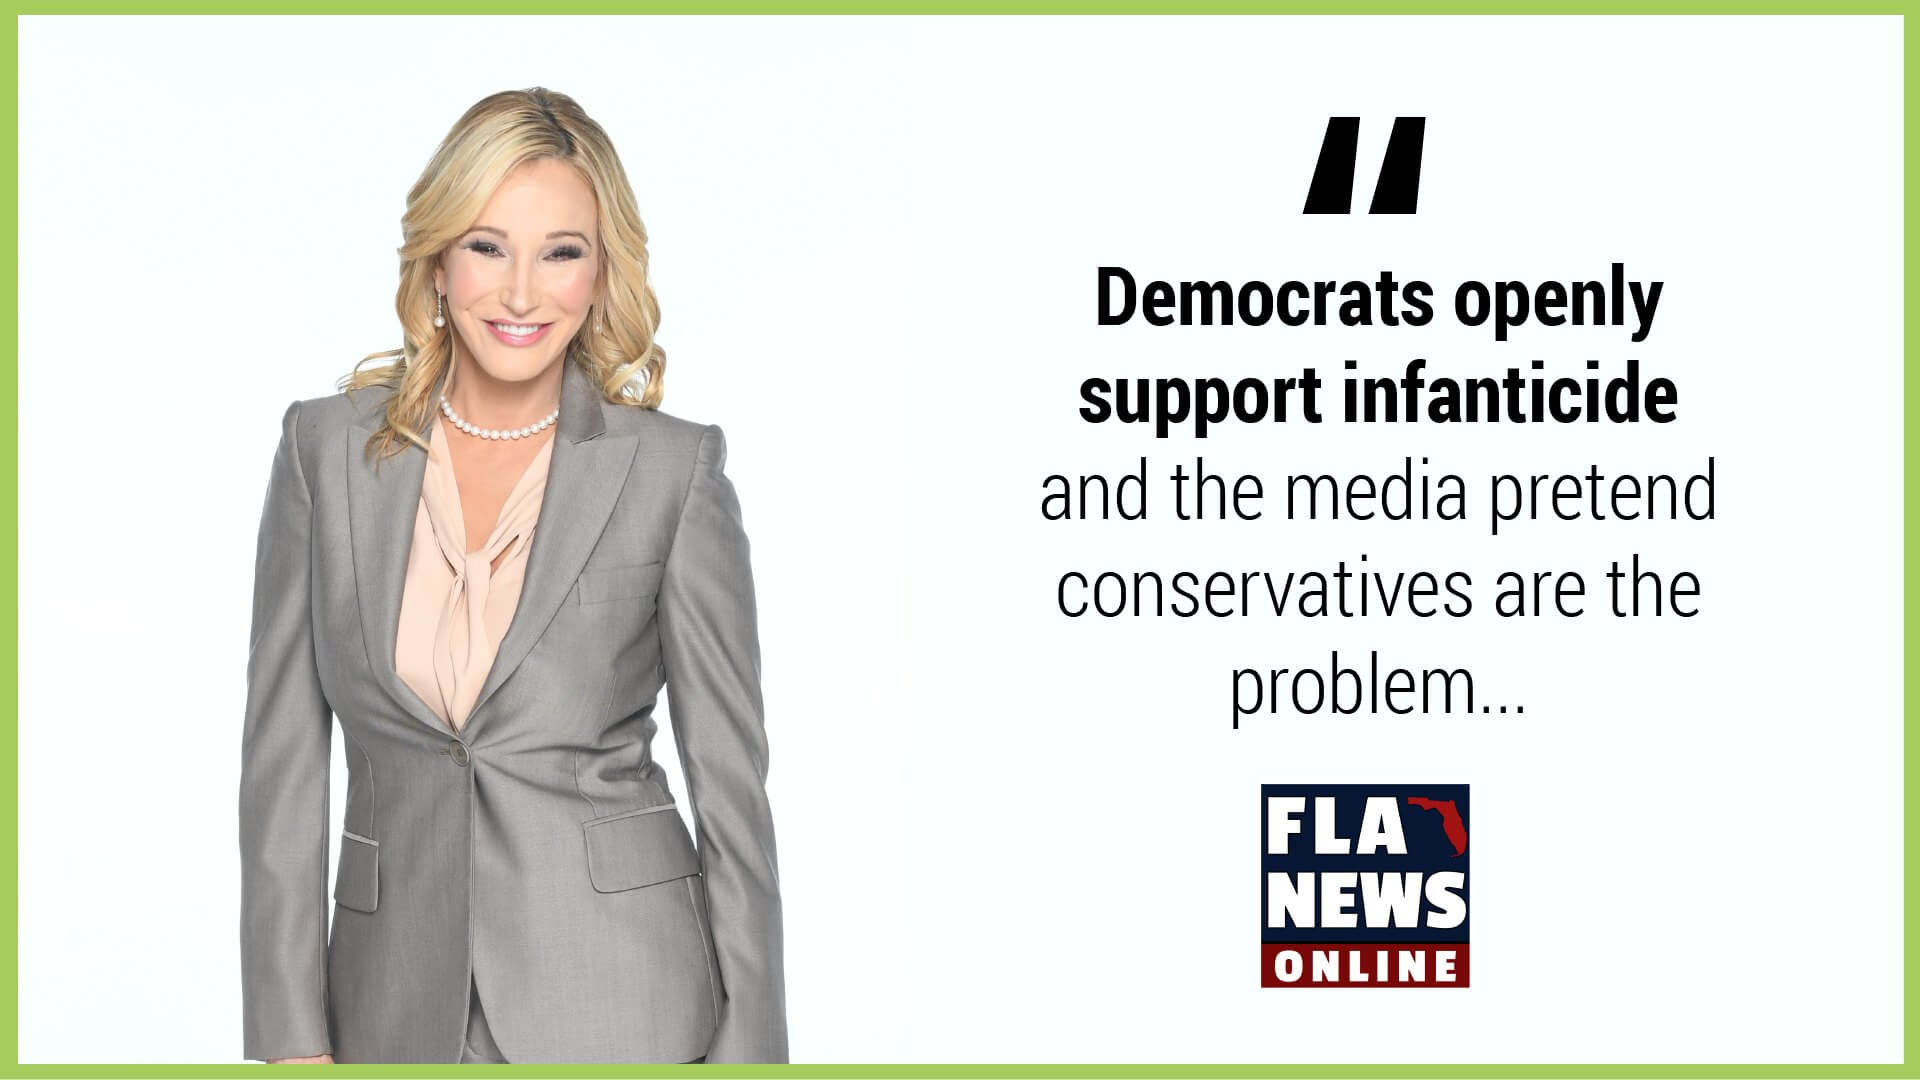 Democrats openly support infanticide and the media pretend conservatives are the problem…